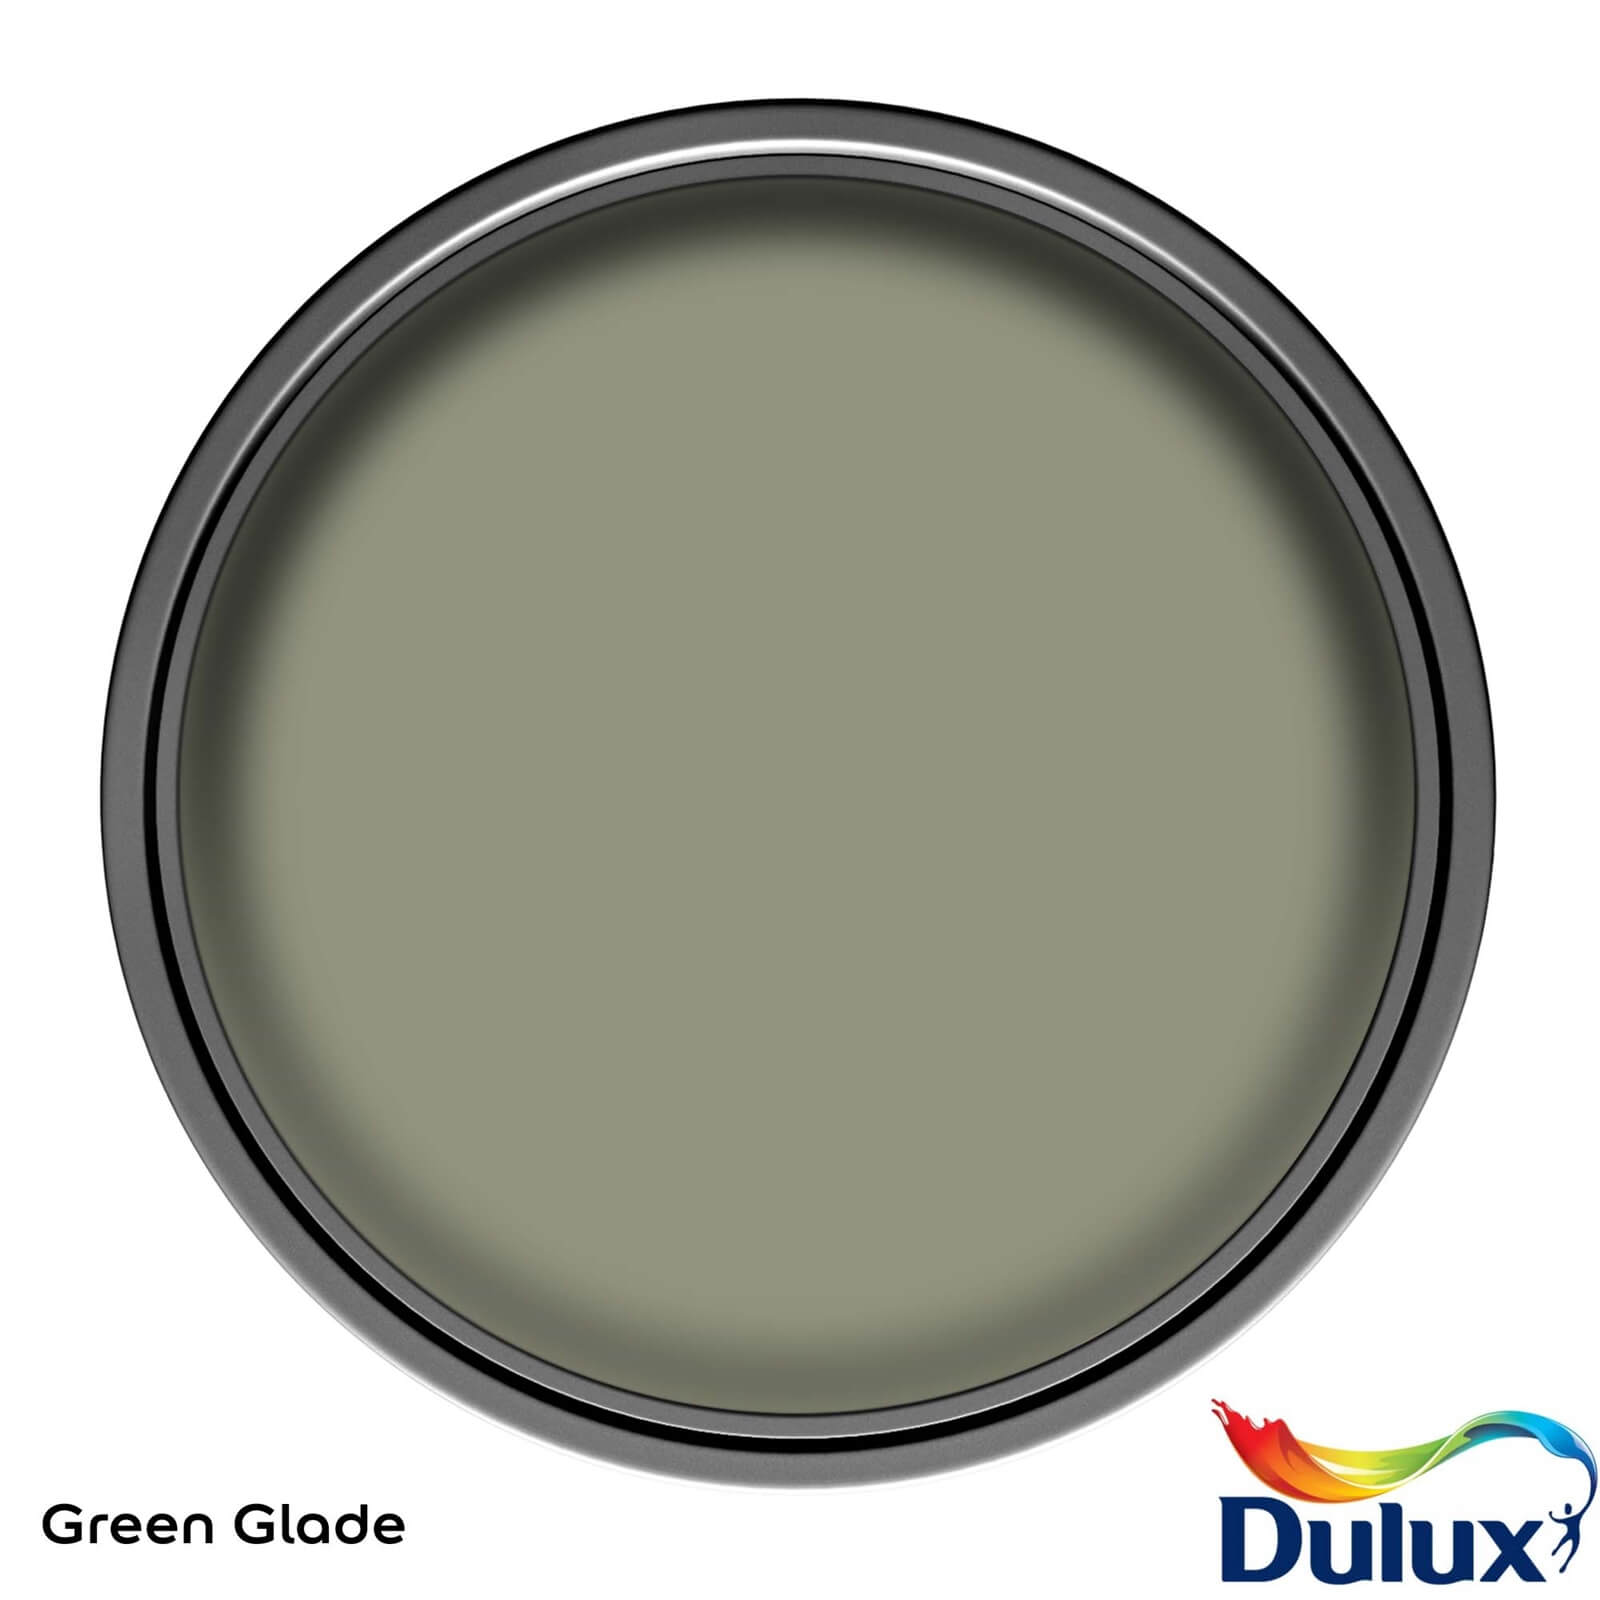 Dulux Weathershield Exterior Quick Dry Satin Paint Green Glade - 2.5L